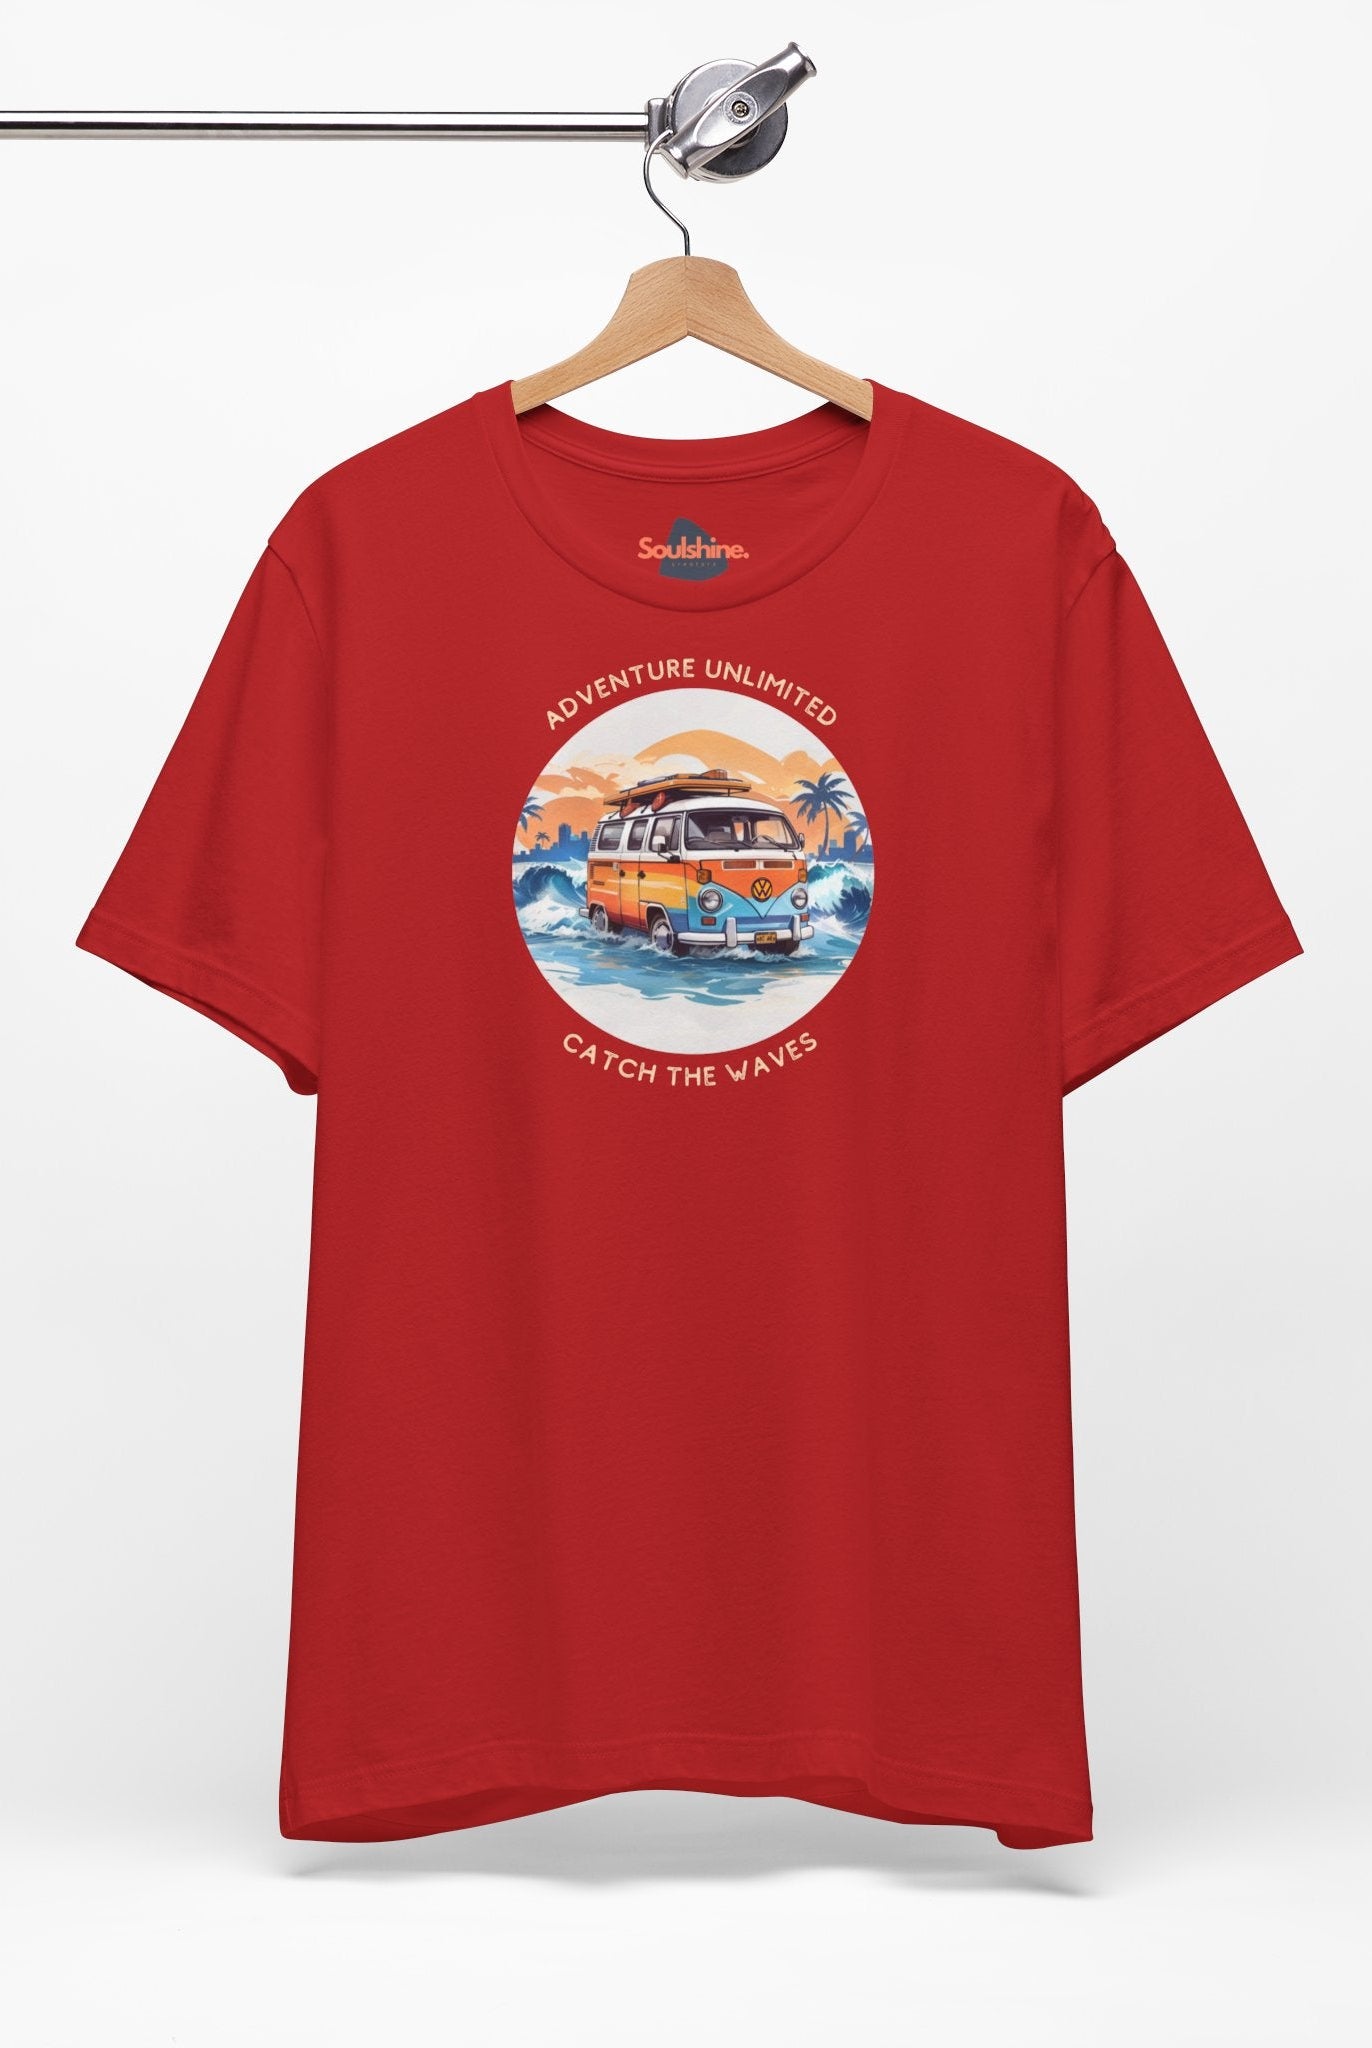 Direct-to-garment printed red t-shirt with ’Adventure Unlimited - Surfing T-Shirt’ design on it